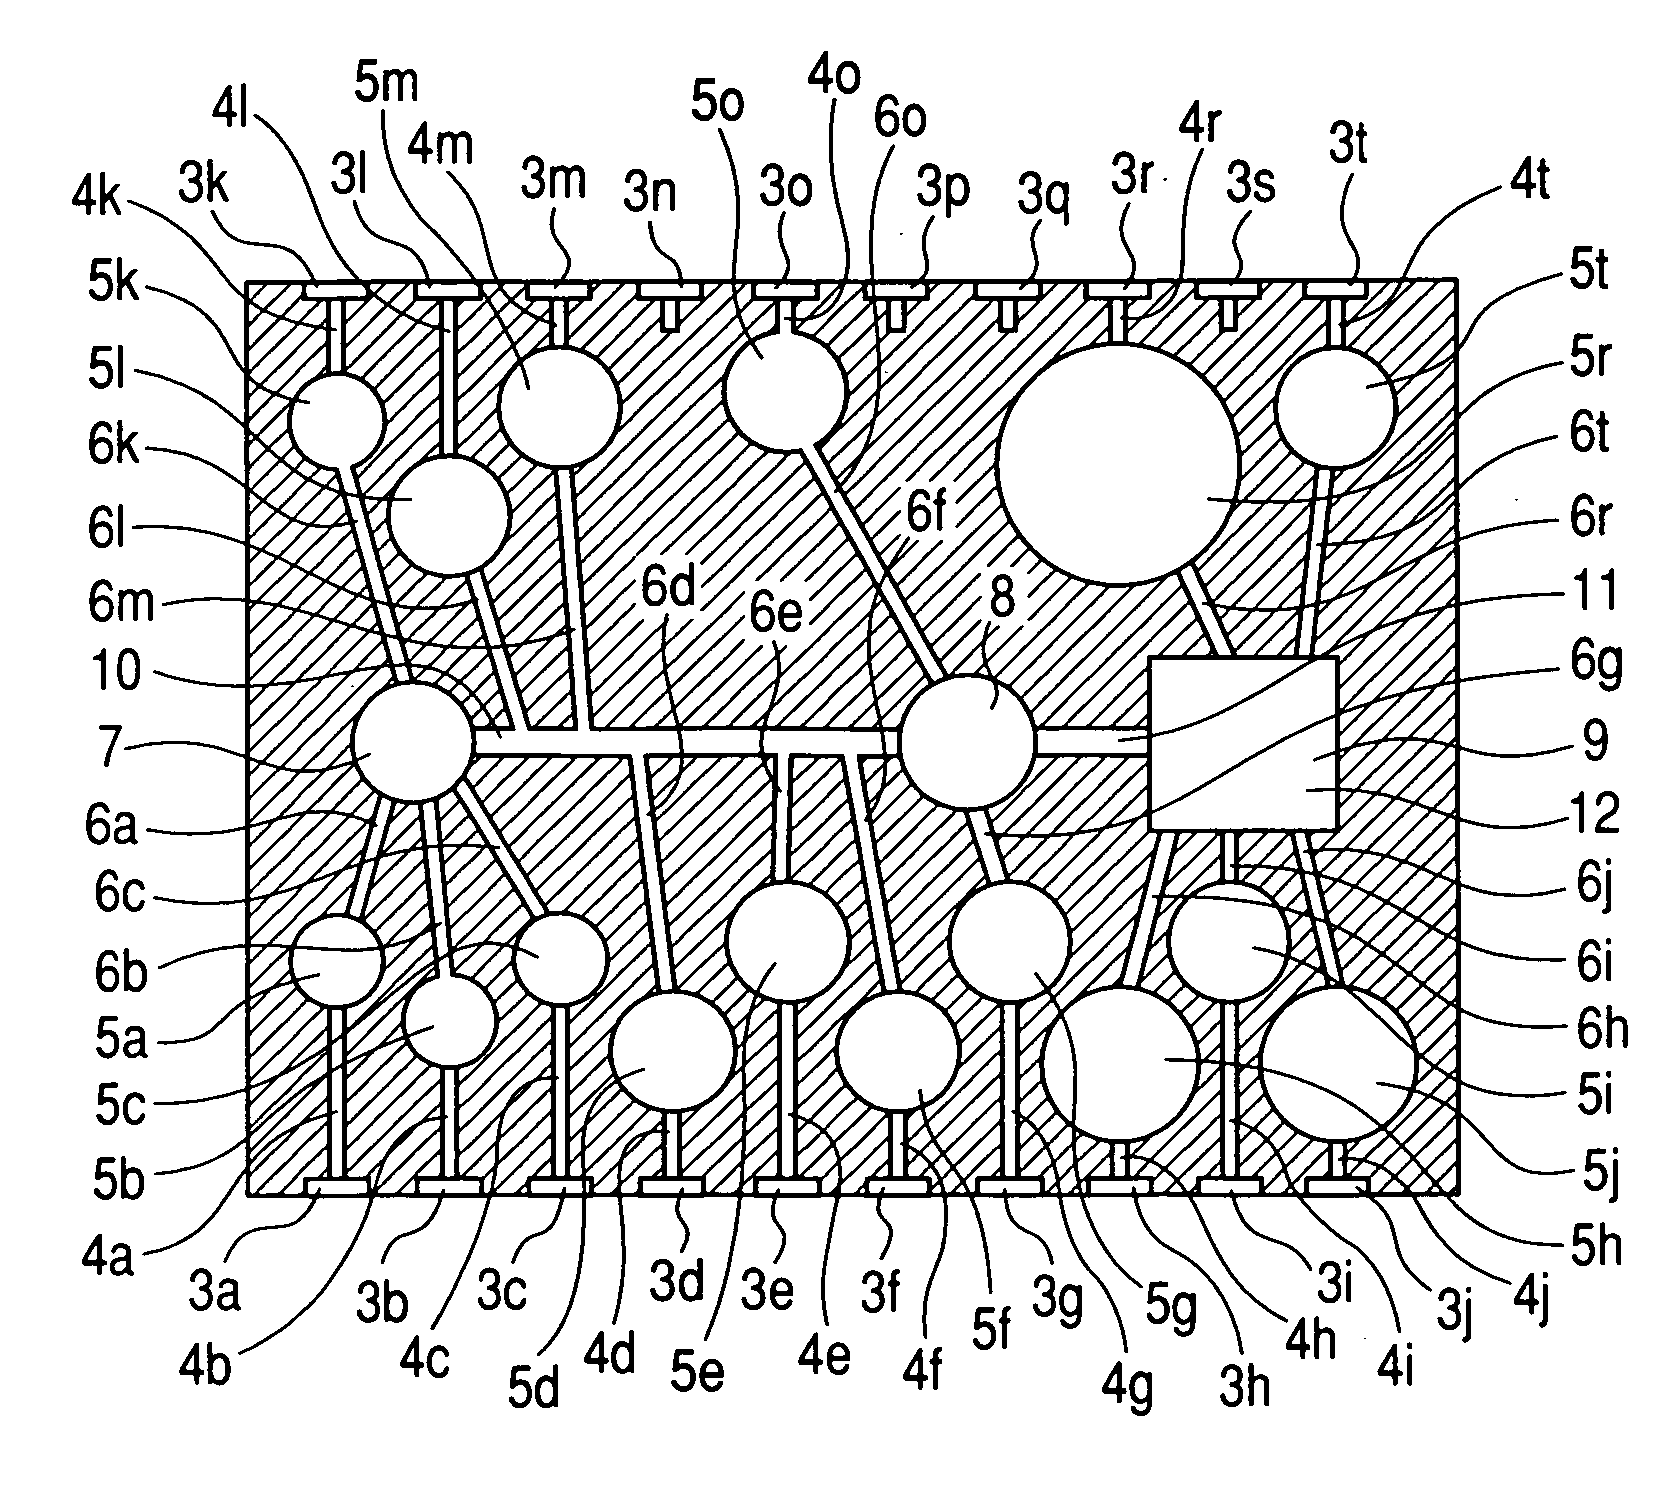 Biochemical reaction cartridge and biochemical treatment equipment system